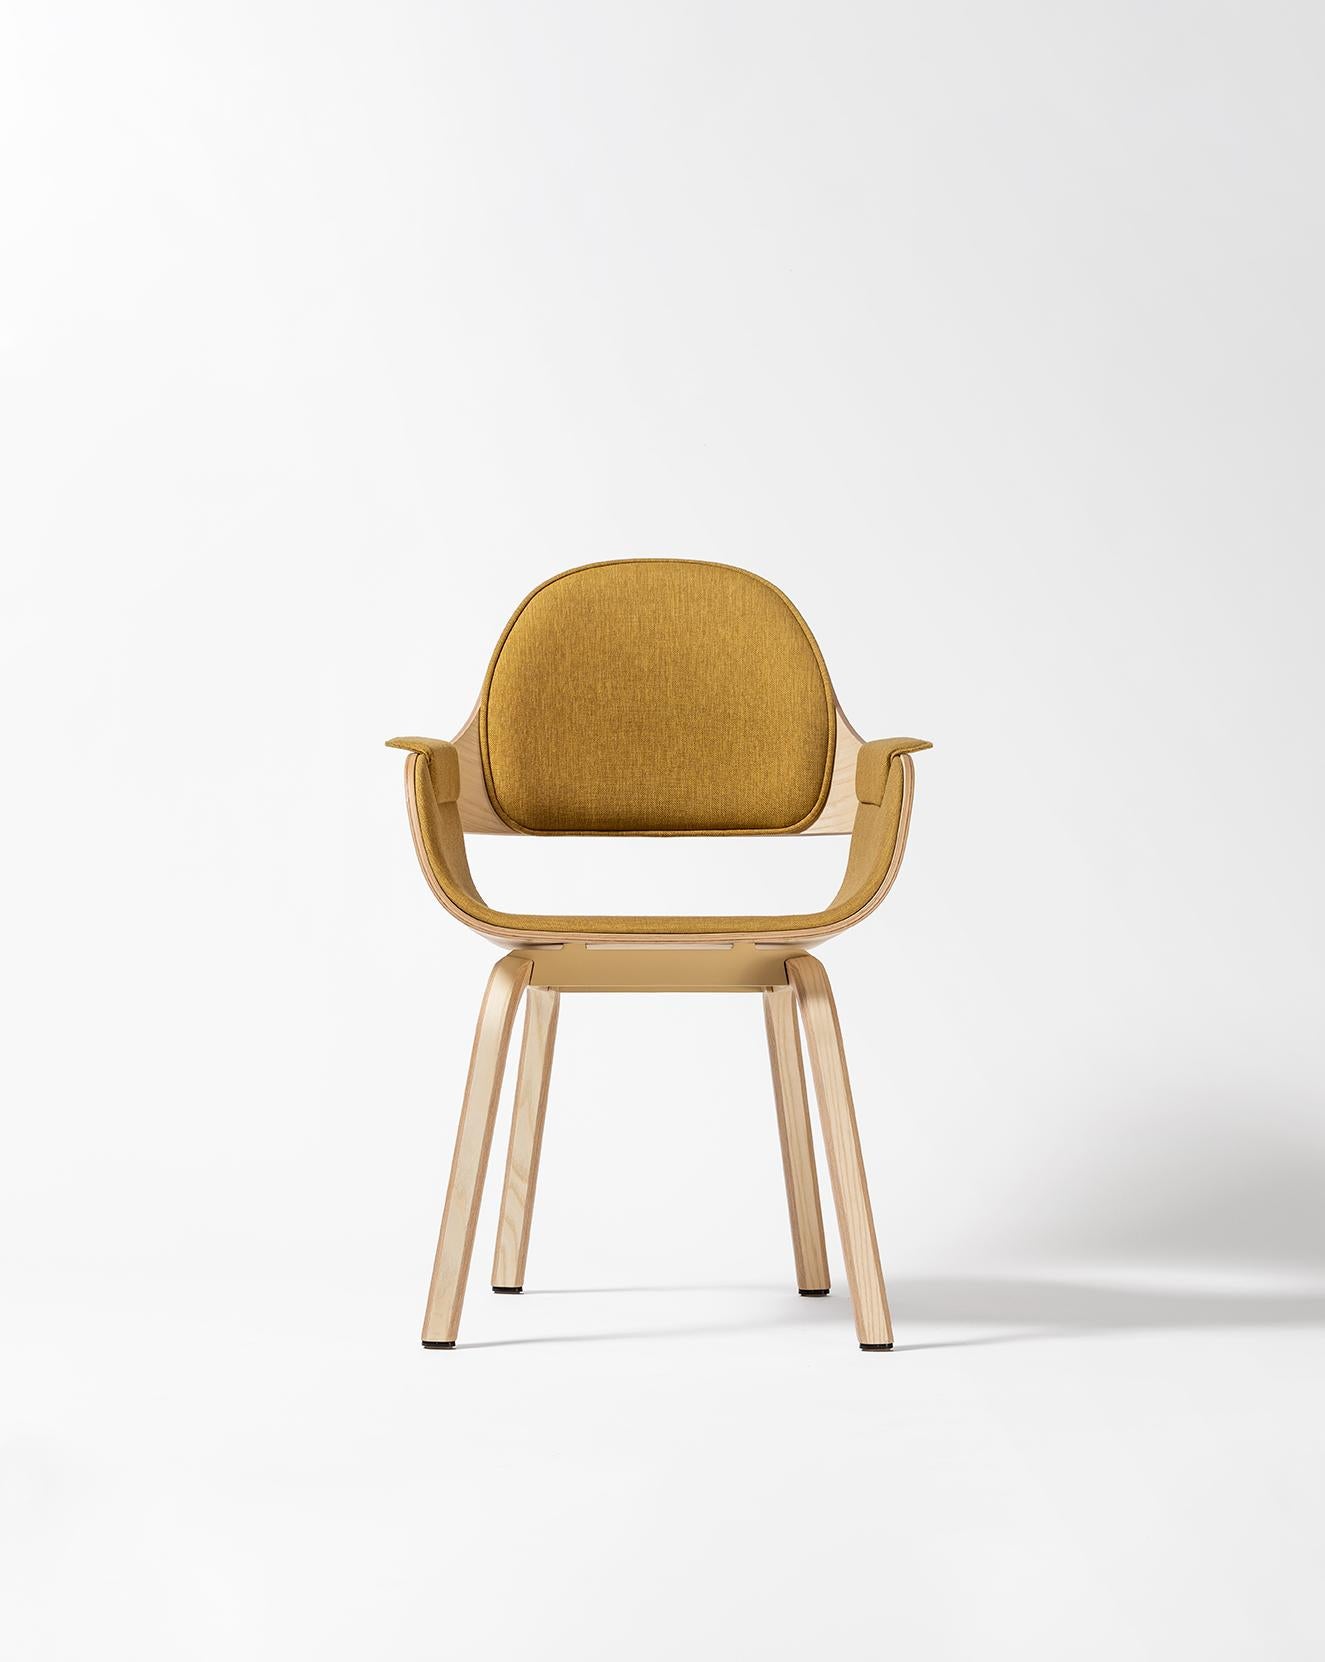 A new version of the Showtime chair by Jaime Hayon which does not make the original design obsolete, but rather compliments it. The Showtime Nude Chair is simpler than the previous version but hasn’t lost any of its personality. We have called it